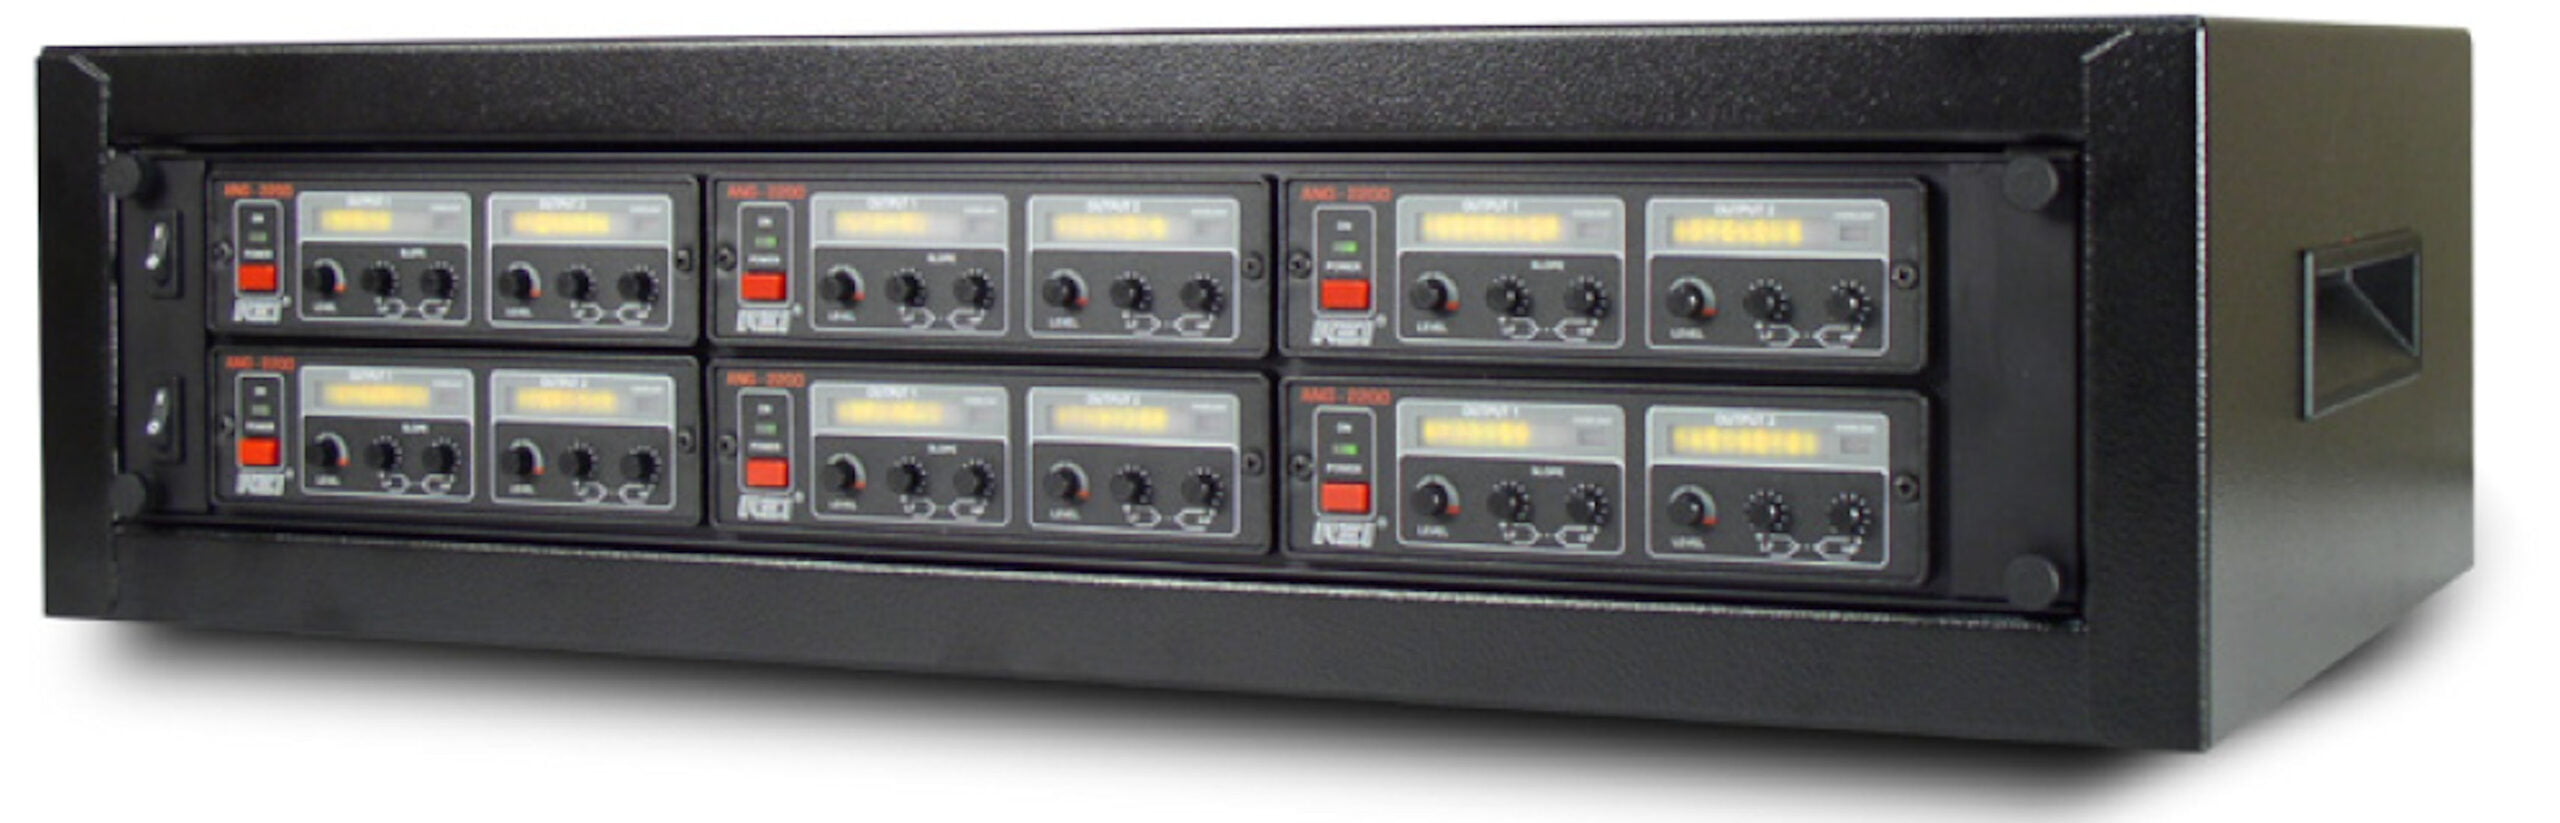 ANG2200_Rack_Mount_System_Available_for_Aecure_Centralized_Control_or_Multiple_Acoustic_Noise_Generators.